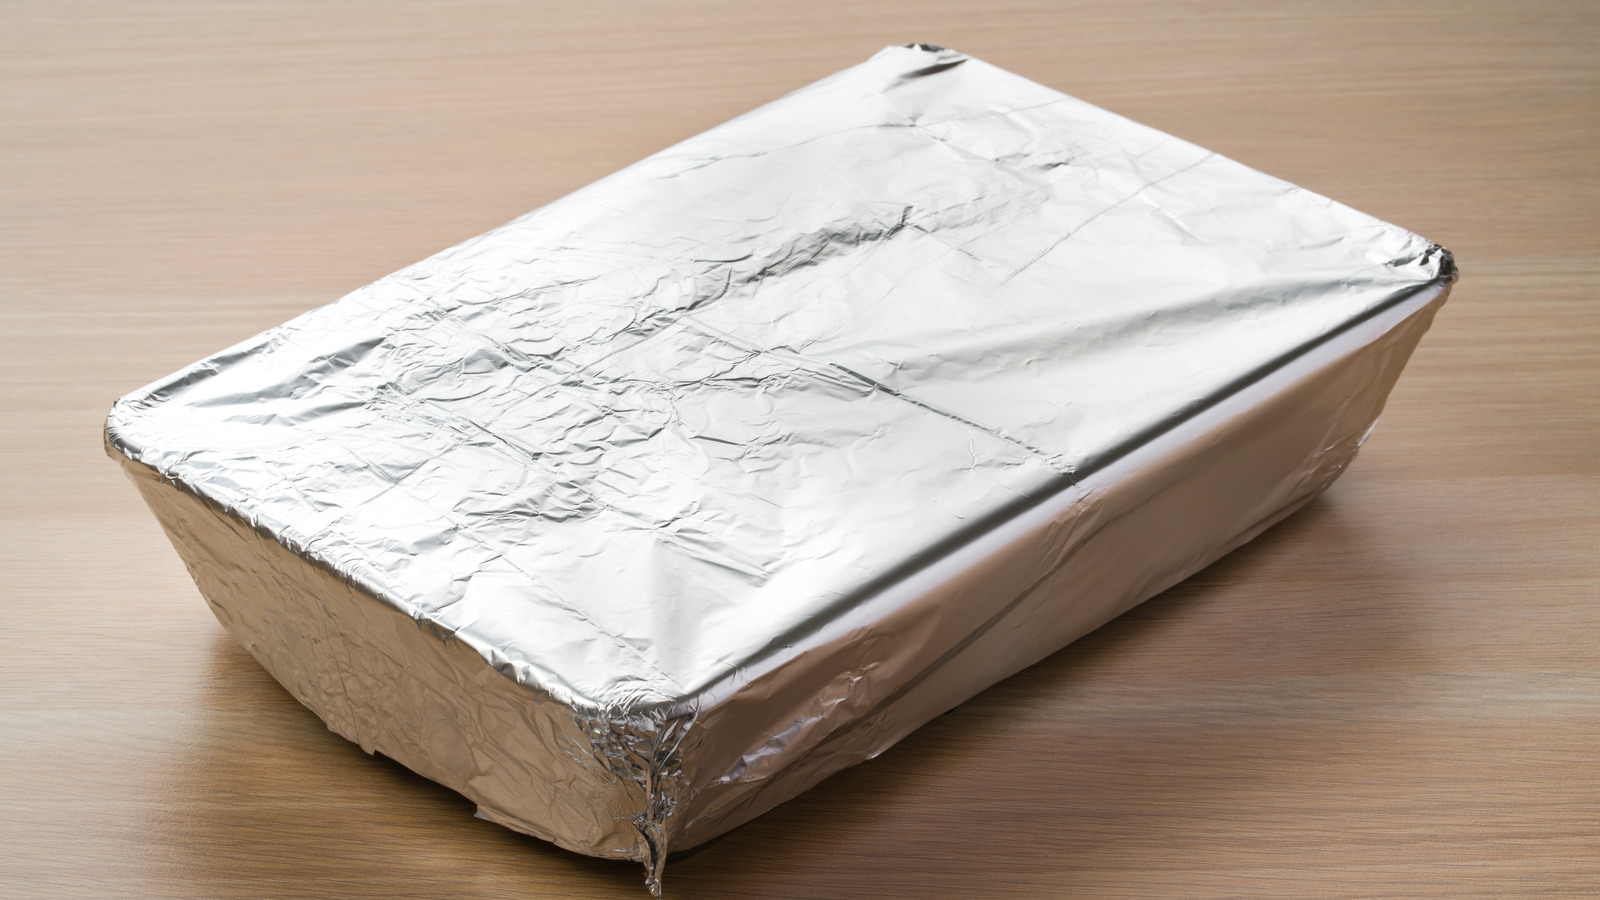 https://www.mashed.com/img/gallery/plastic-wrap-vs-aluminum-foil-which-is-more-eco-friendly/l-intro-1607189261.jpg